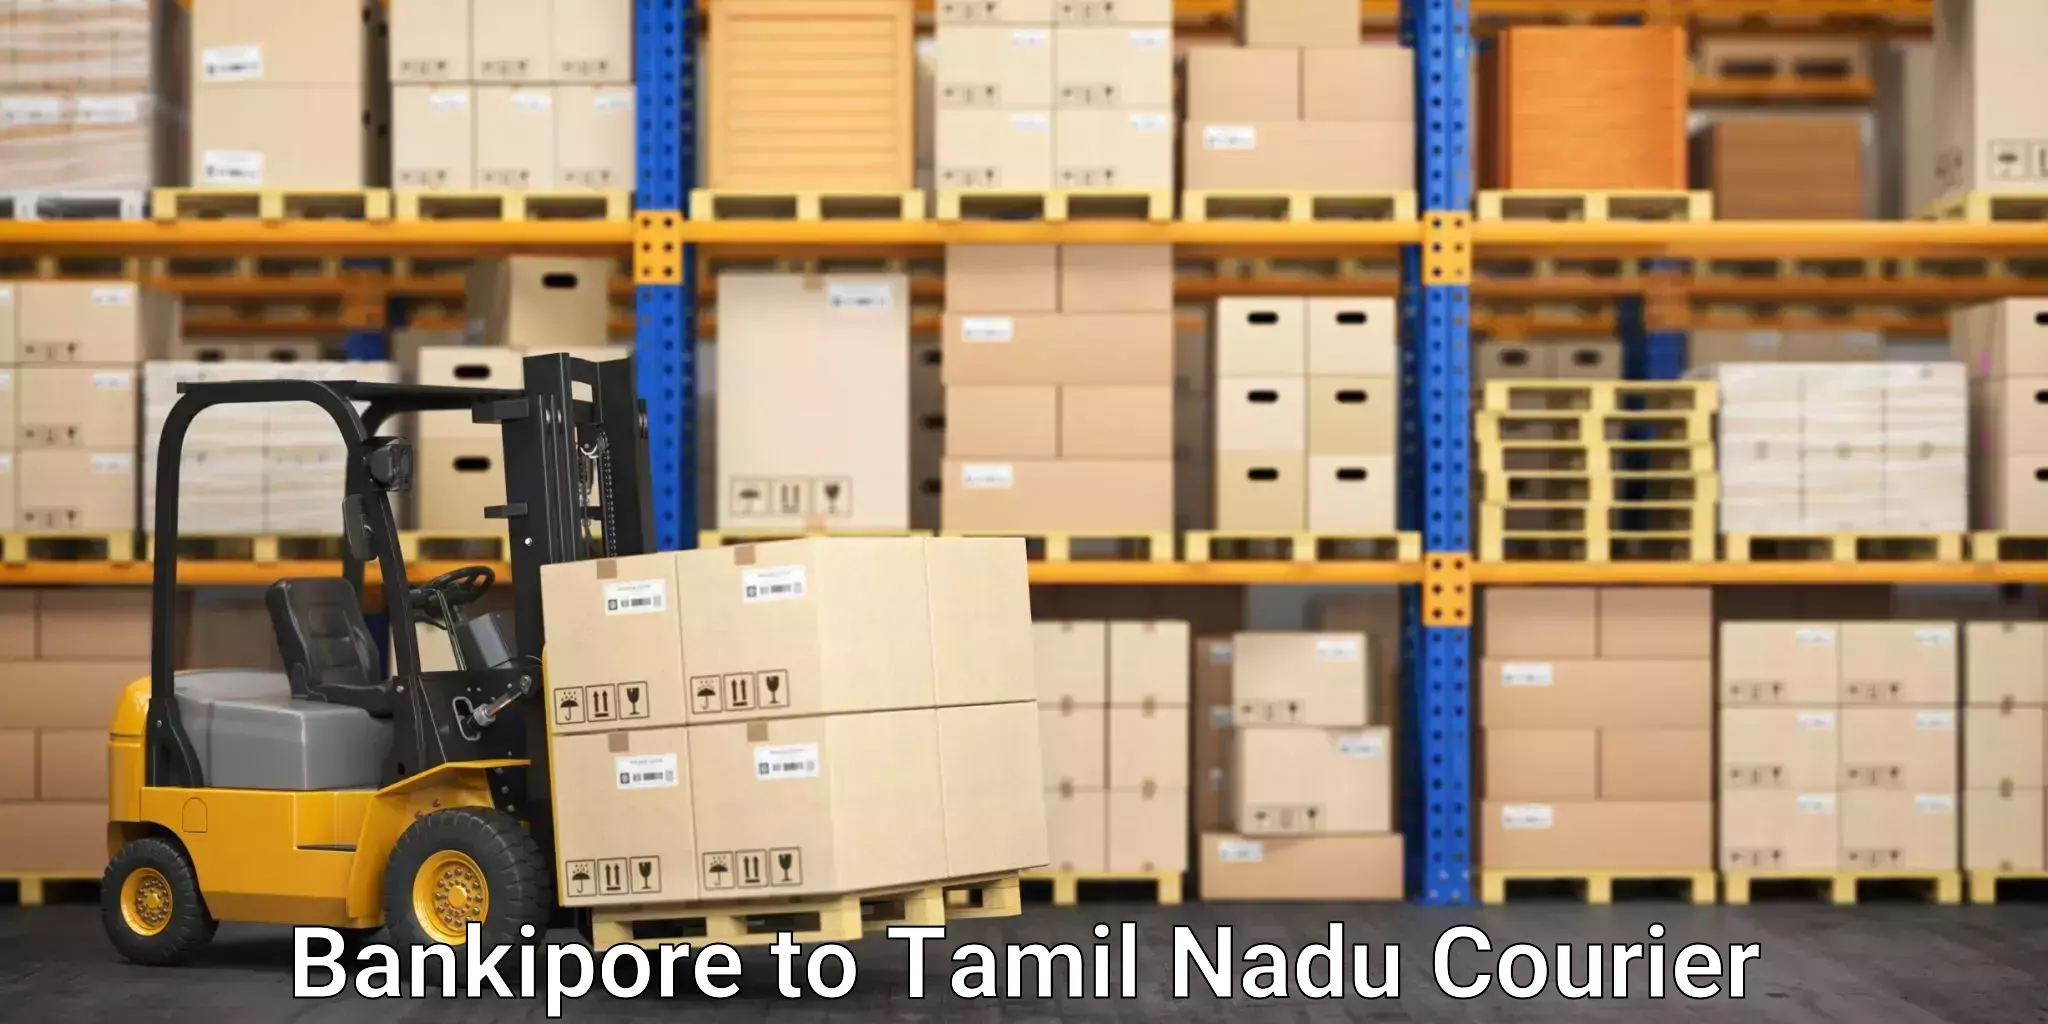 Home goods moving company Bankipore to Ambattur